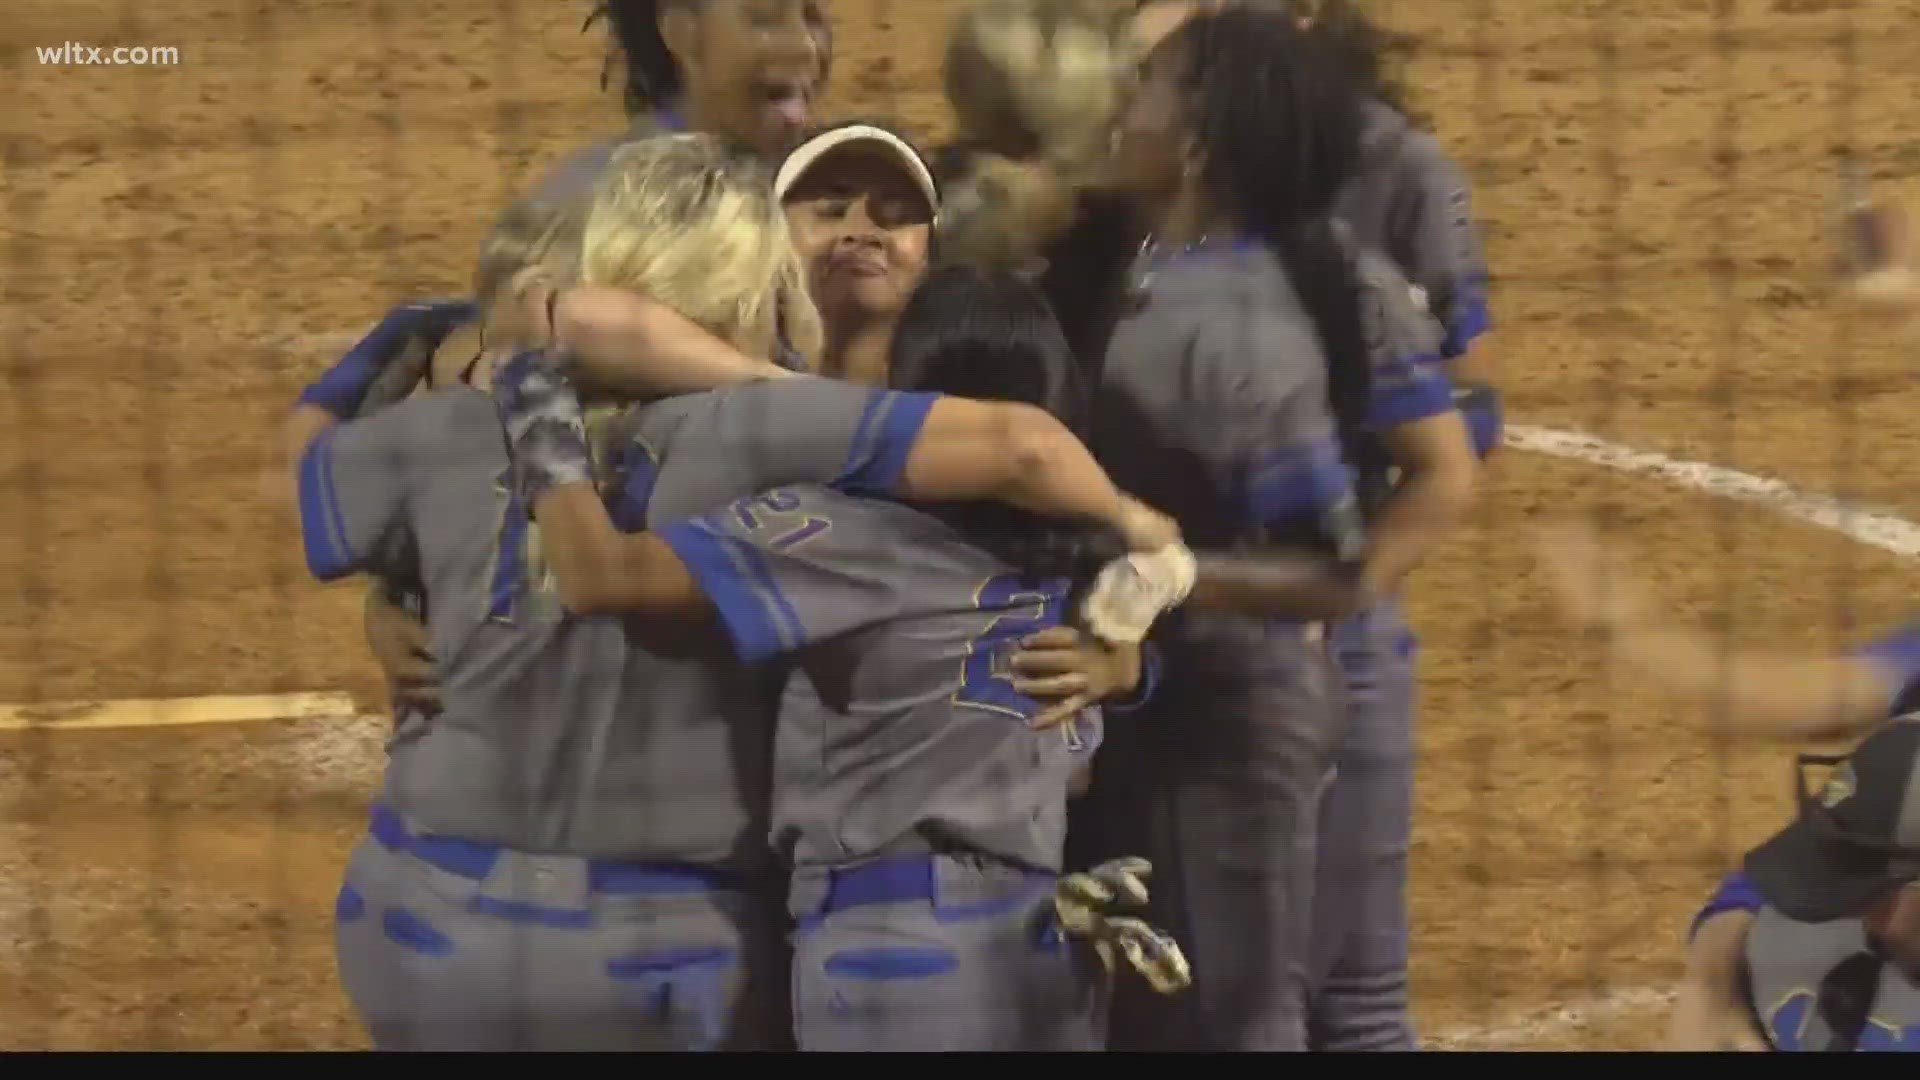 Highlights from game three of the 2A softball state championship series between Mid-Carolina and Chesterfield.